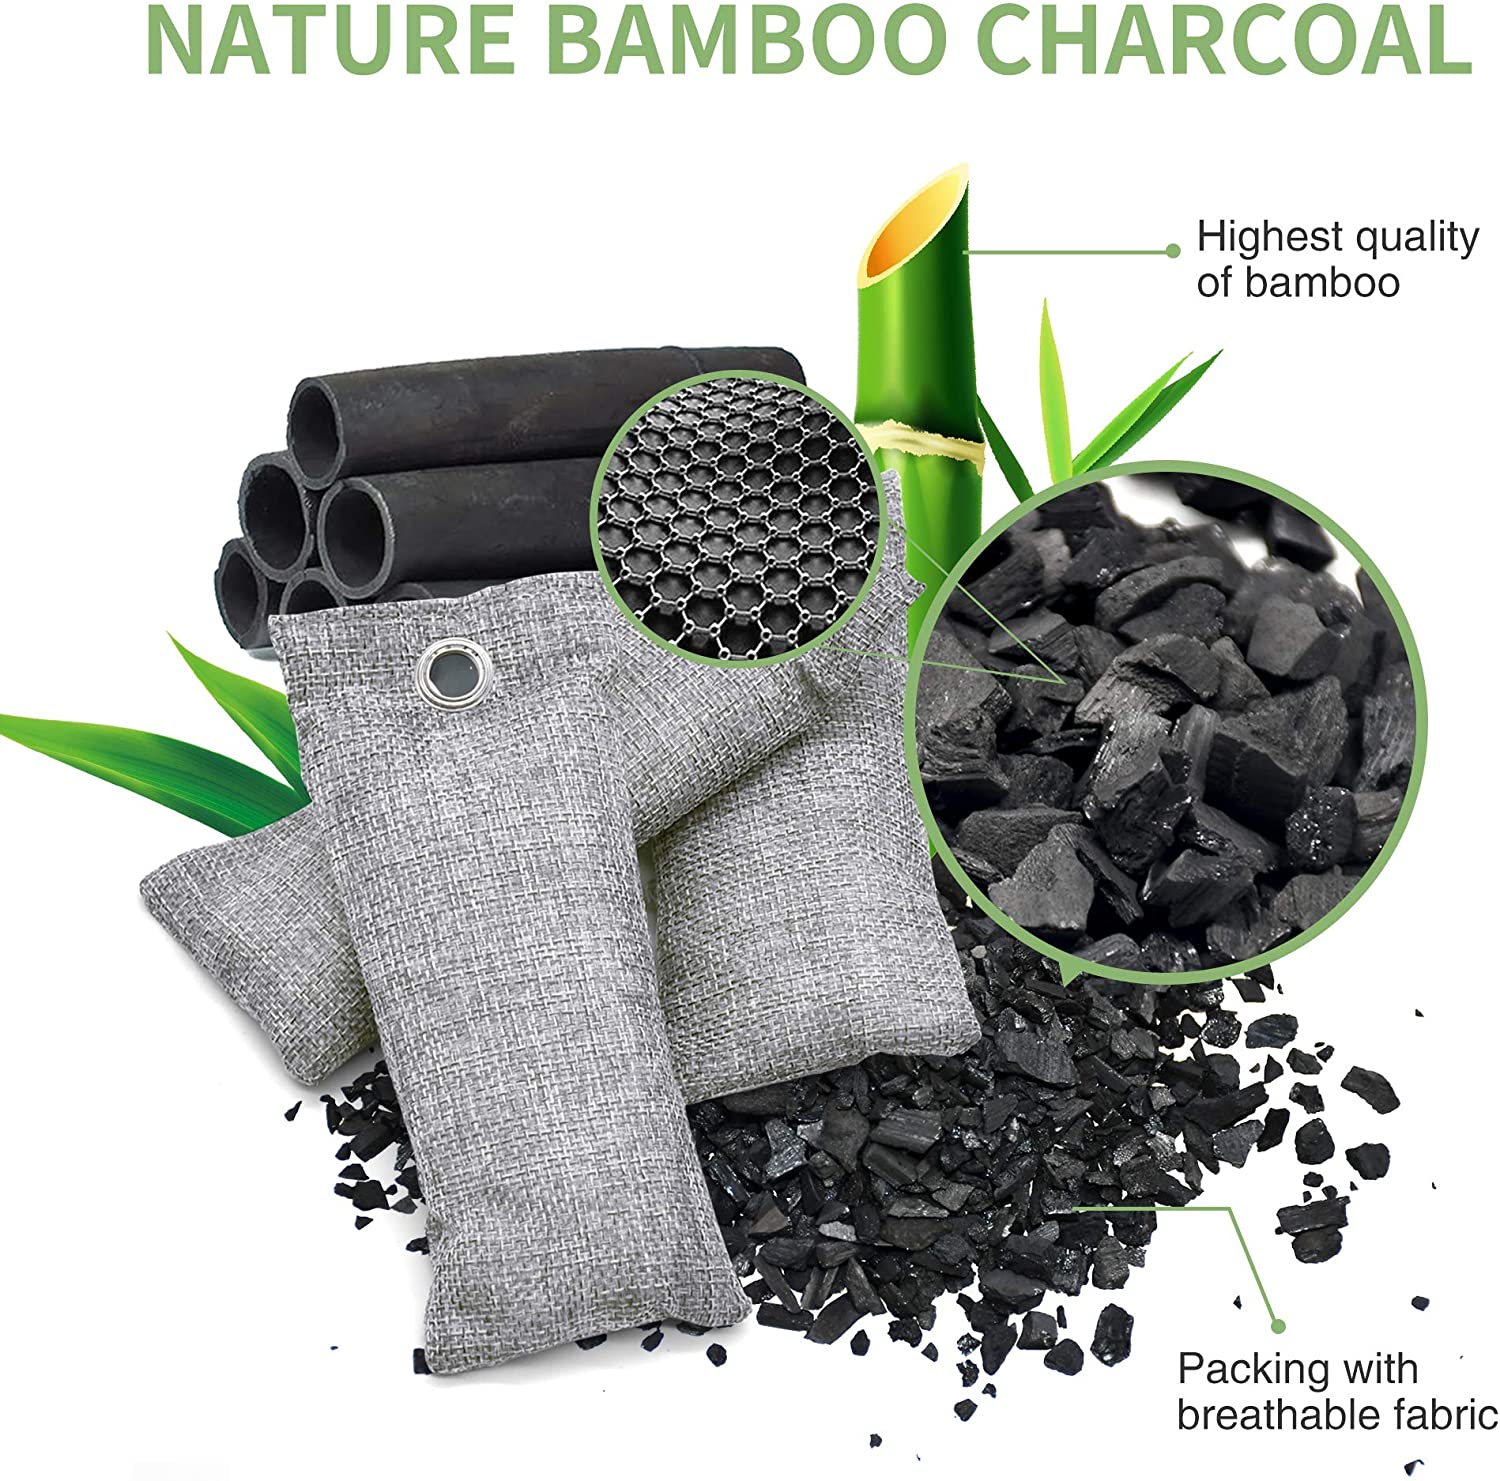 Activated Bamboo Charcoal Natural Eco Friendly for Home, Car, Closet, Shoes, 12 Pack per set - 2 Sets